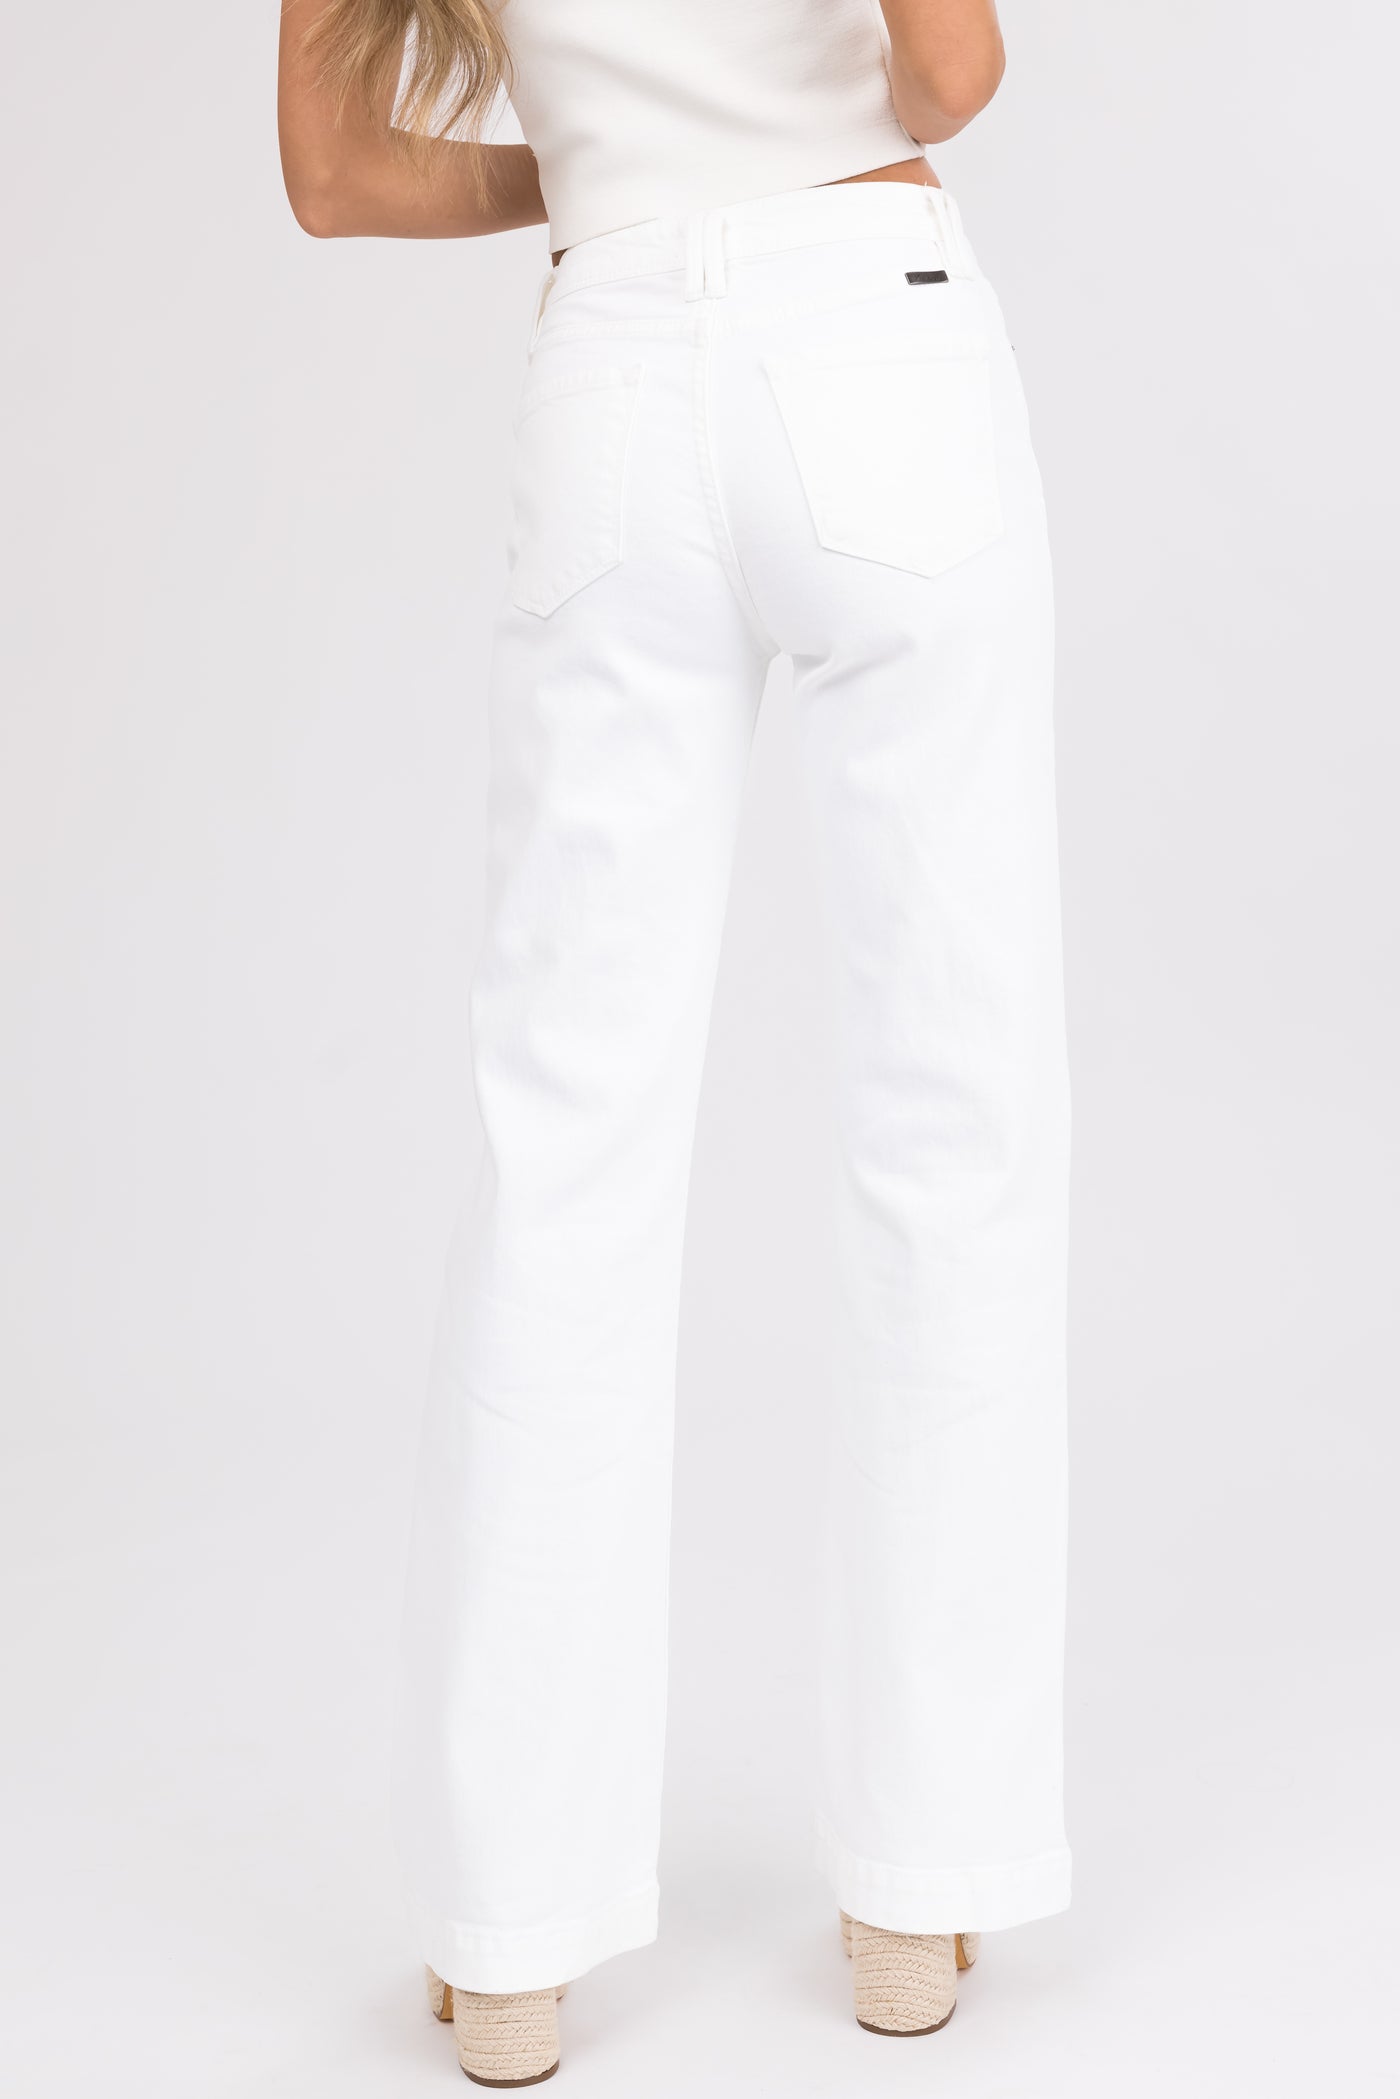 KanCan Ivory High Rise Wide Relaxed Denim Jeans